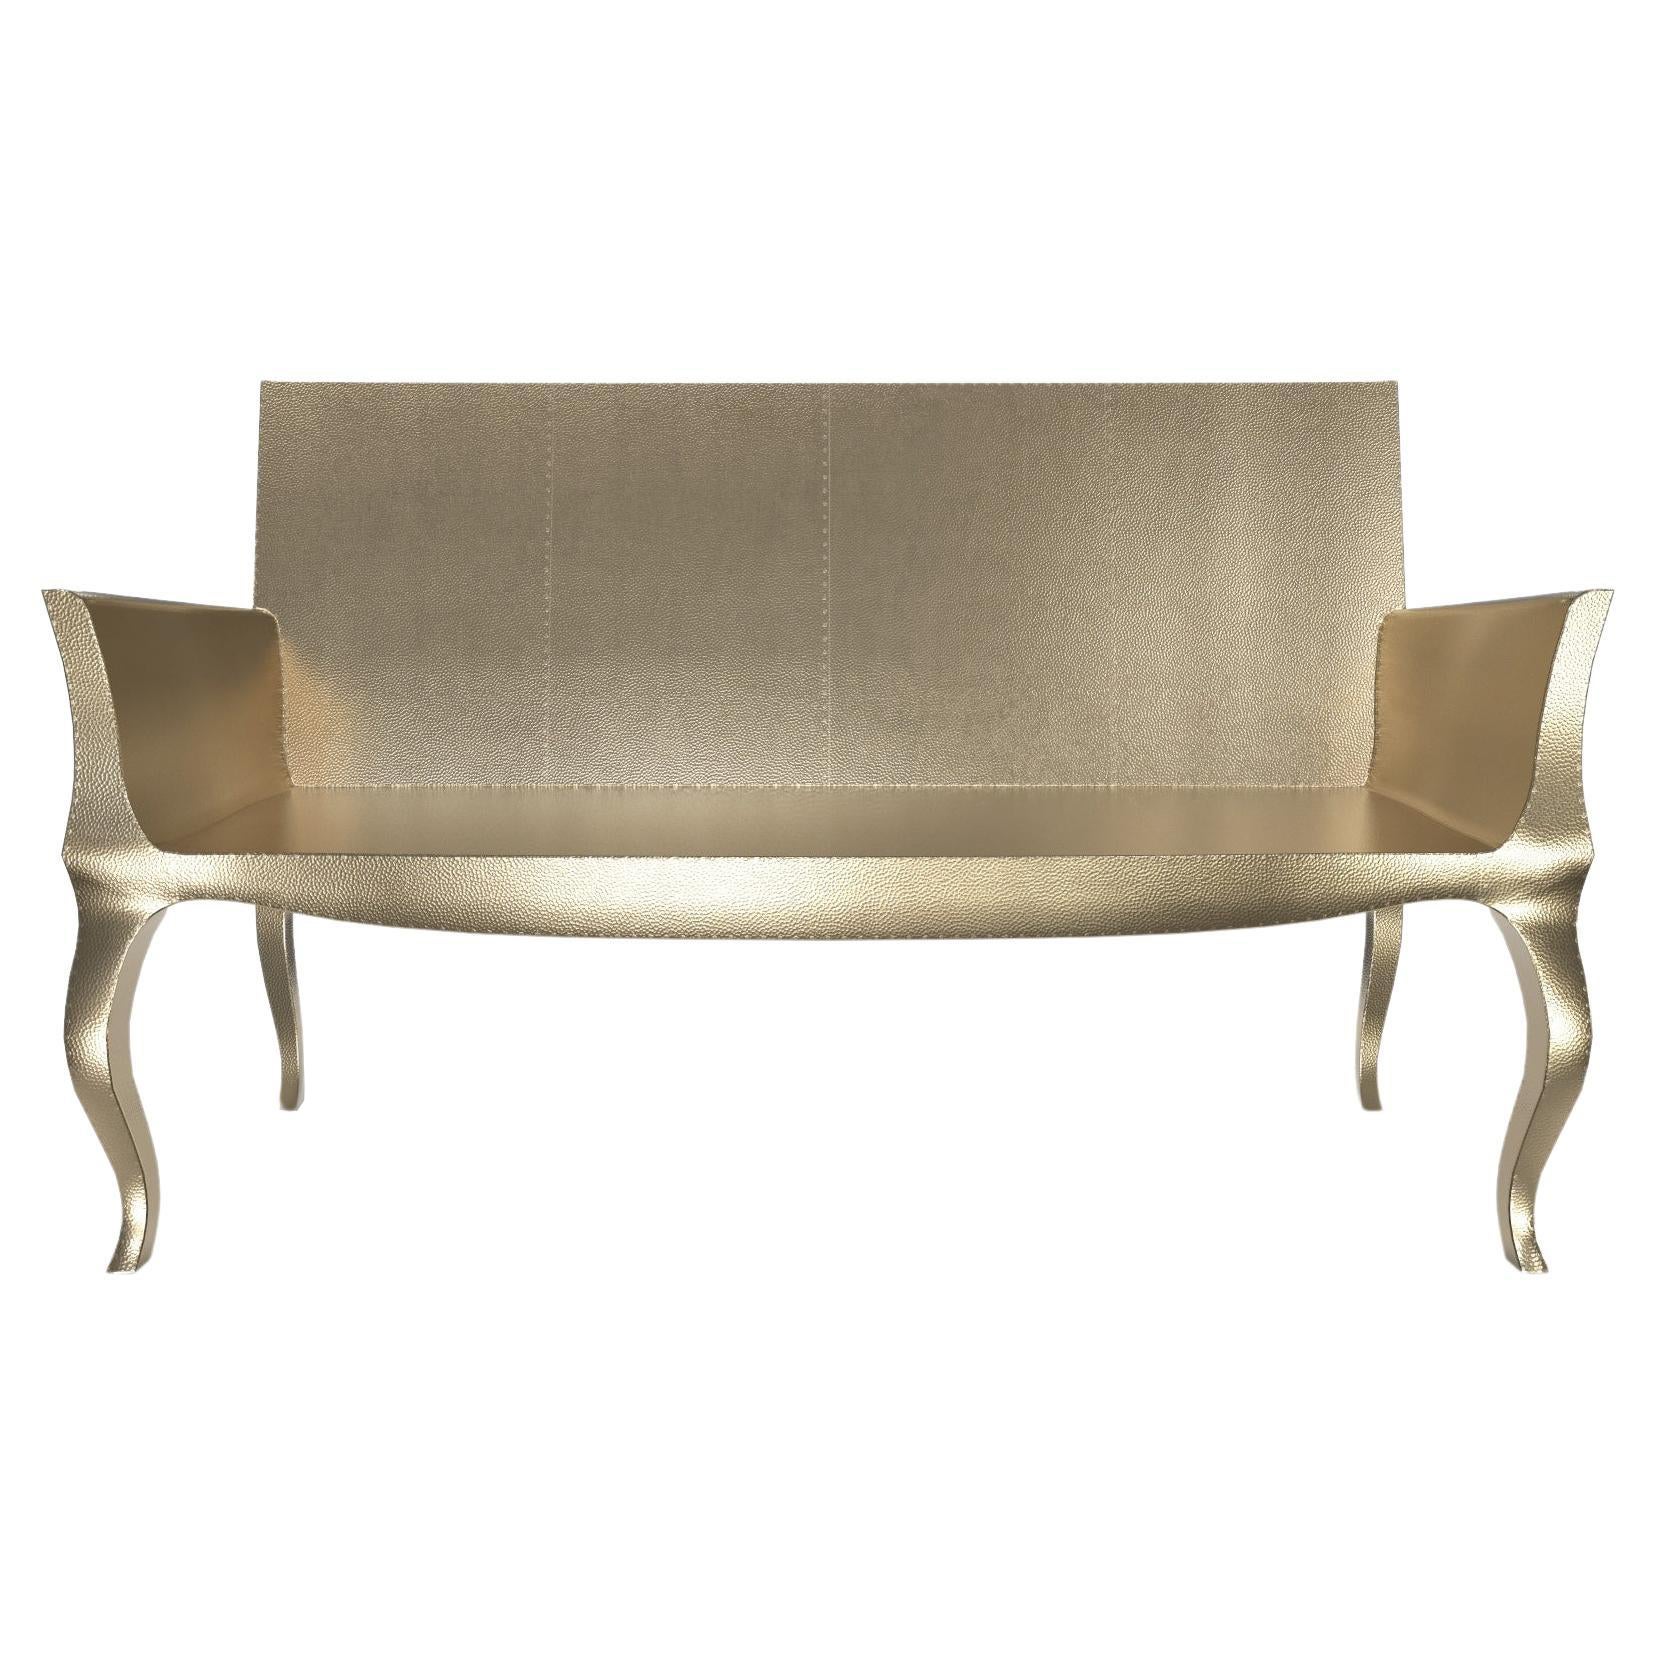 Louise Settee Art Deco Chaise Longues in Mid. Hammered Brass by Paul Mathieu For Sale